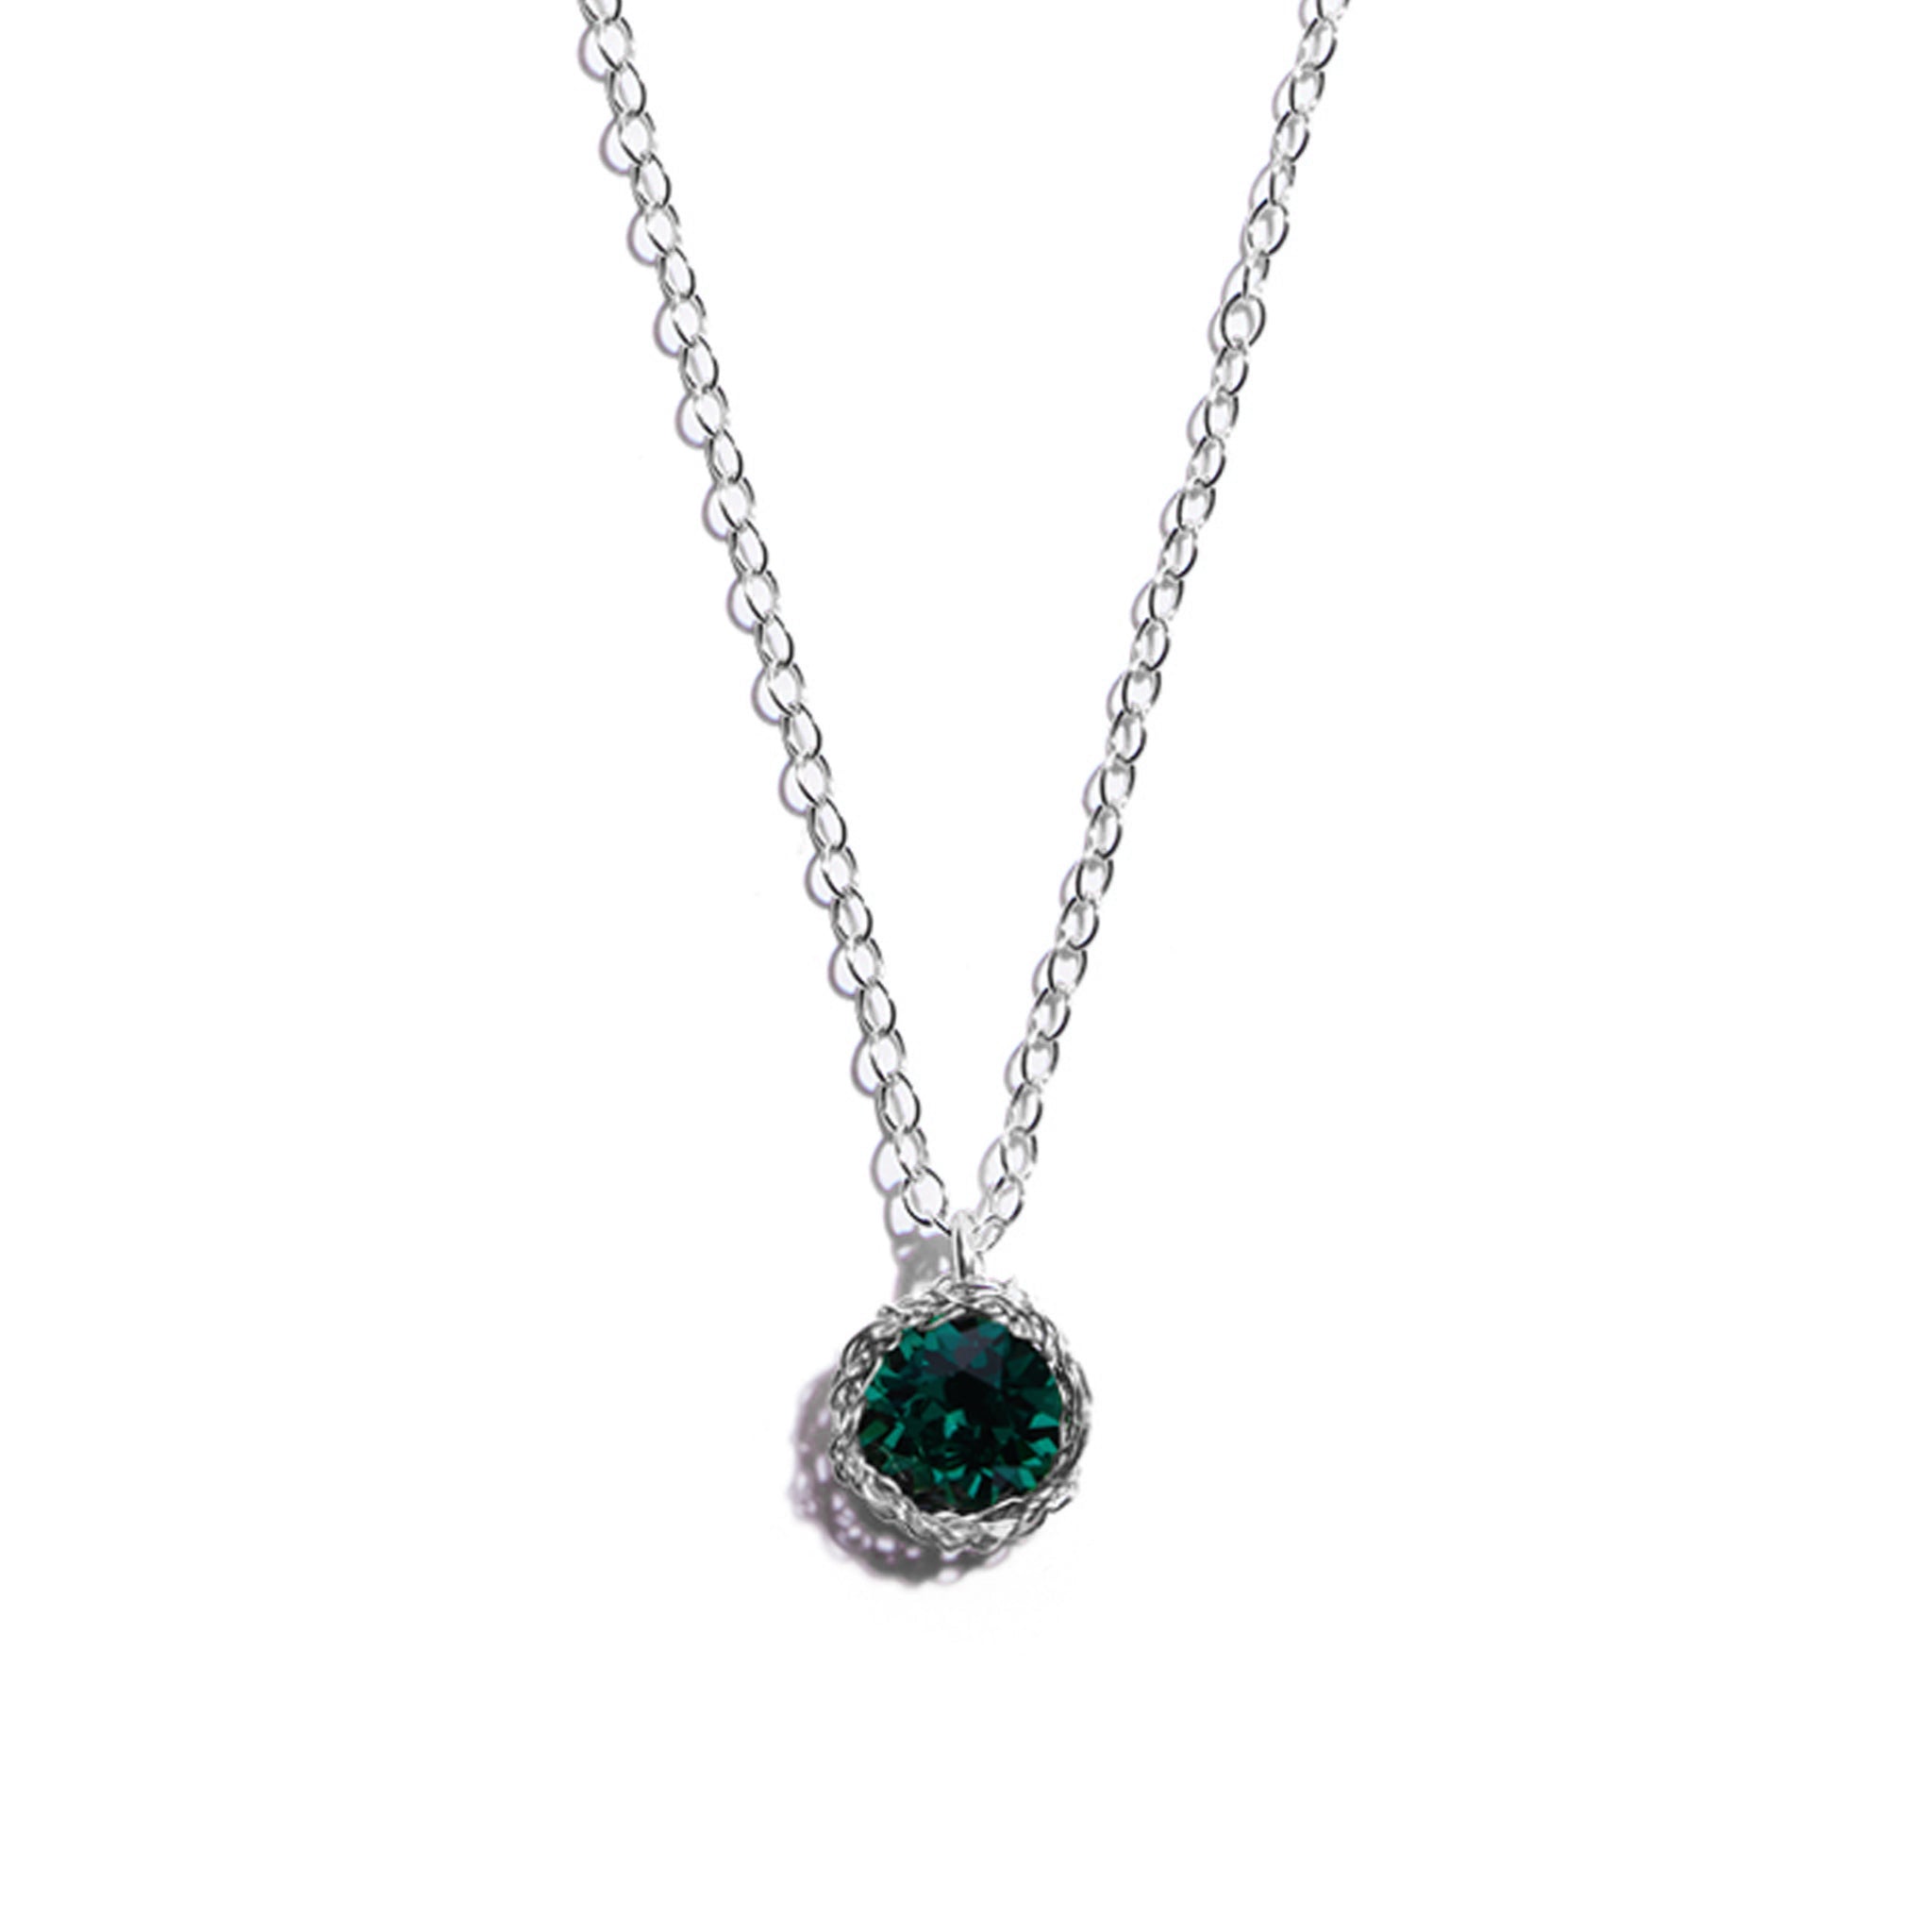 Close-up photo of a crochet necklace featuring a May birthstone pendant made of emerald, set in sterling silver.